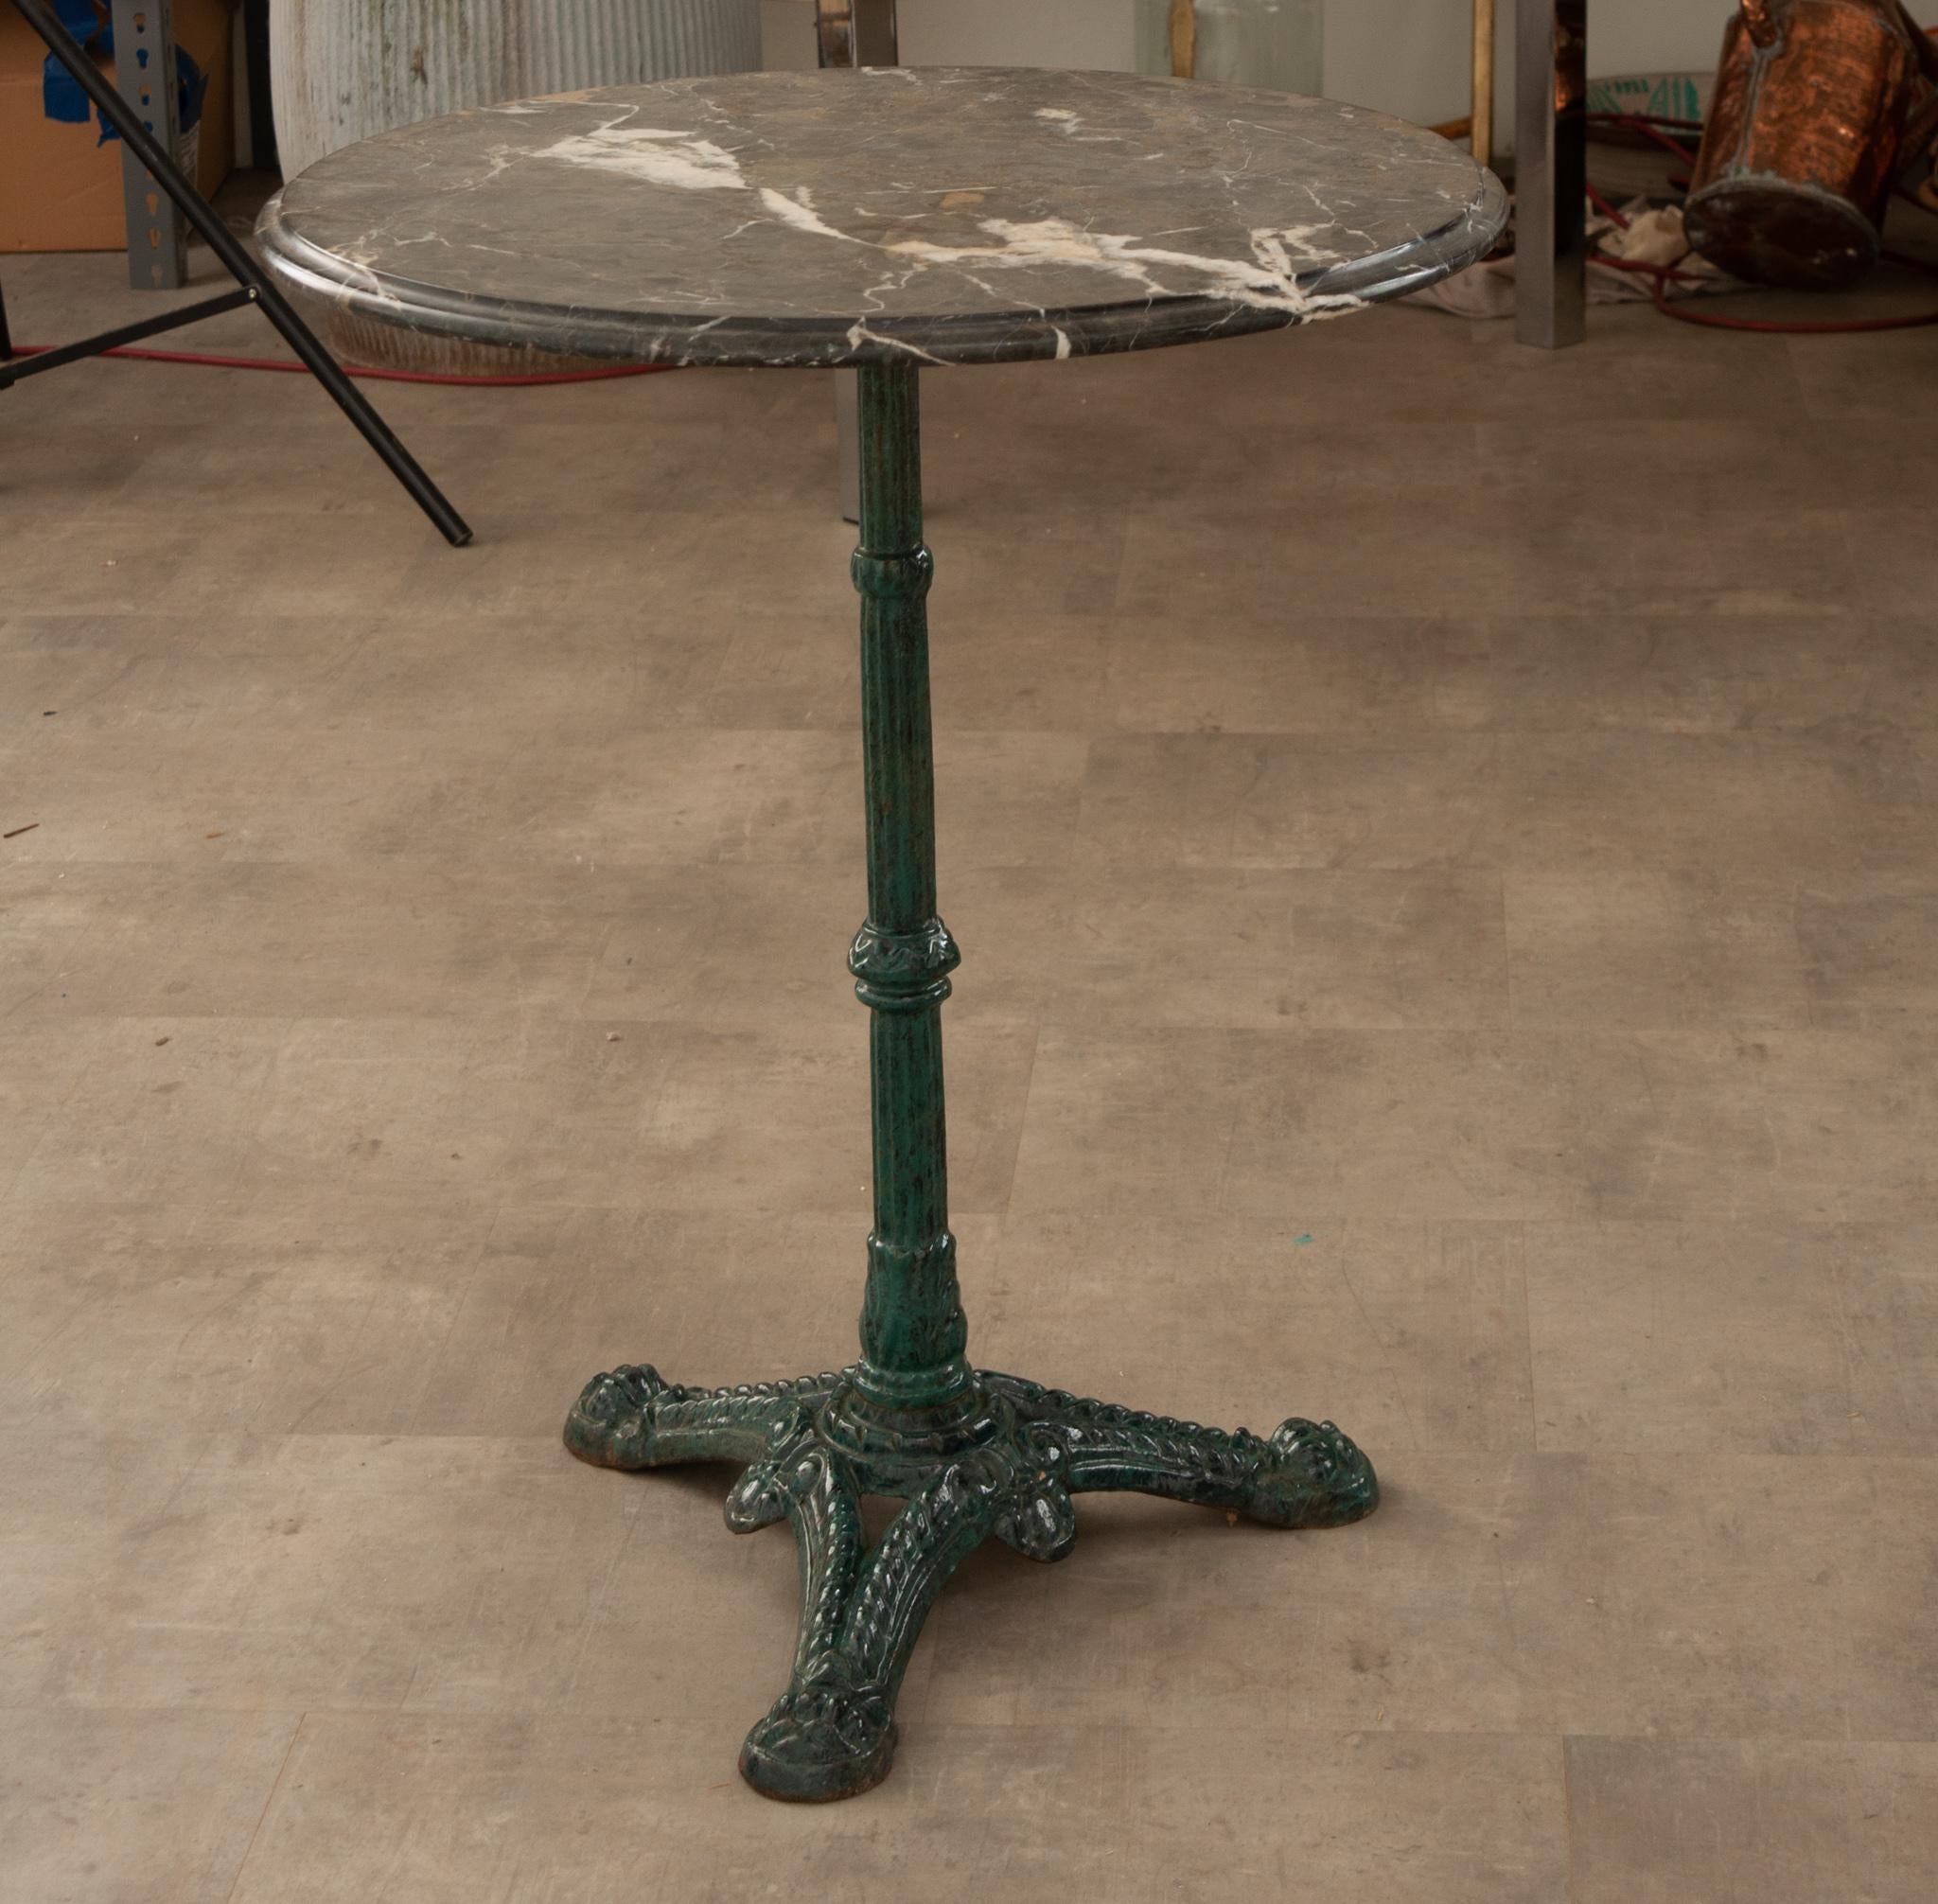 A classically composed bistro table from France, circa 1920. The charcoal marble top has interesting white veining and a molded edge that gives it a great finished look. The enameled iron base has a green tint that nicely compliments the top. A